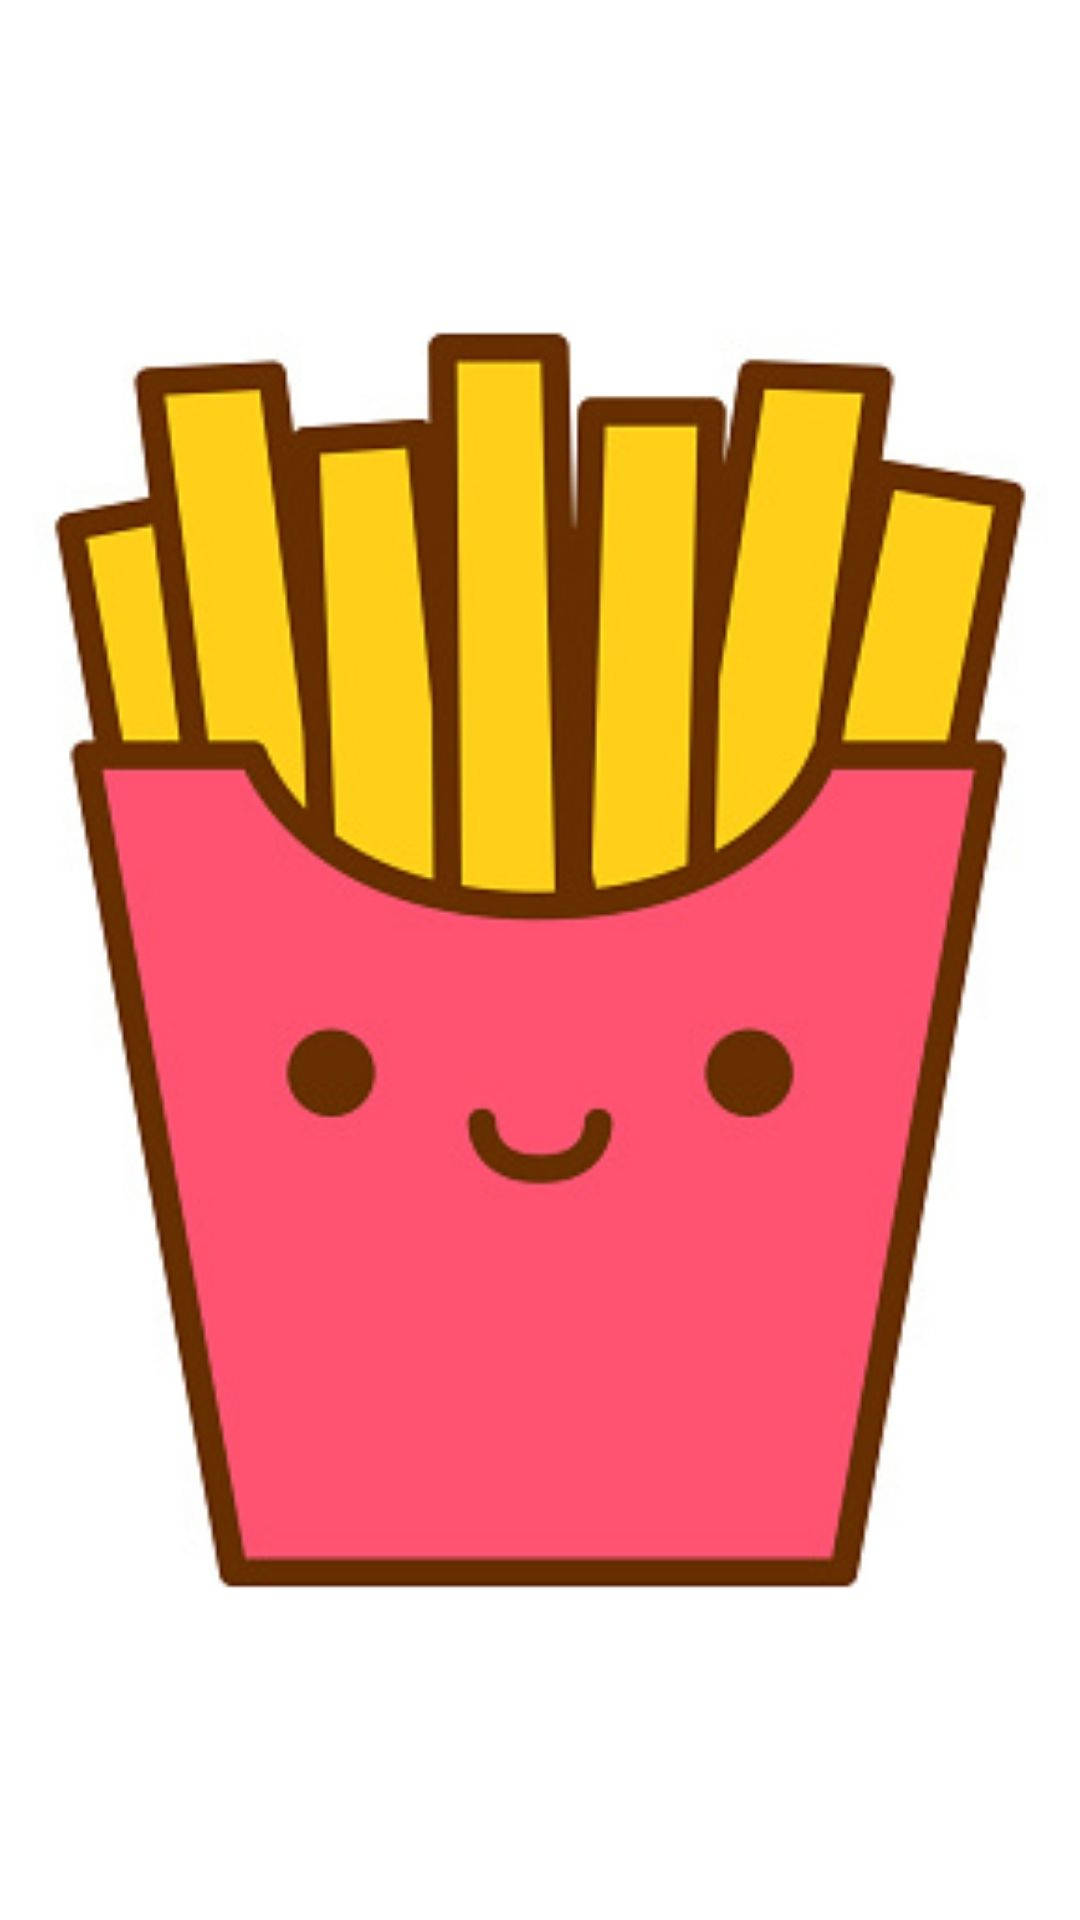 Playful Pink French Fries - Add A Pop Of Color To Your Snack Time! Background